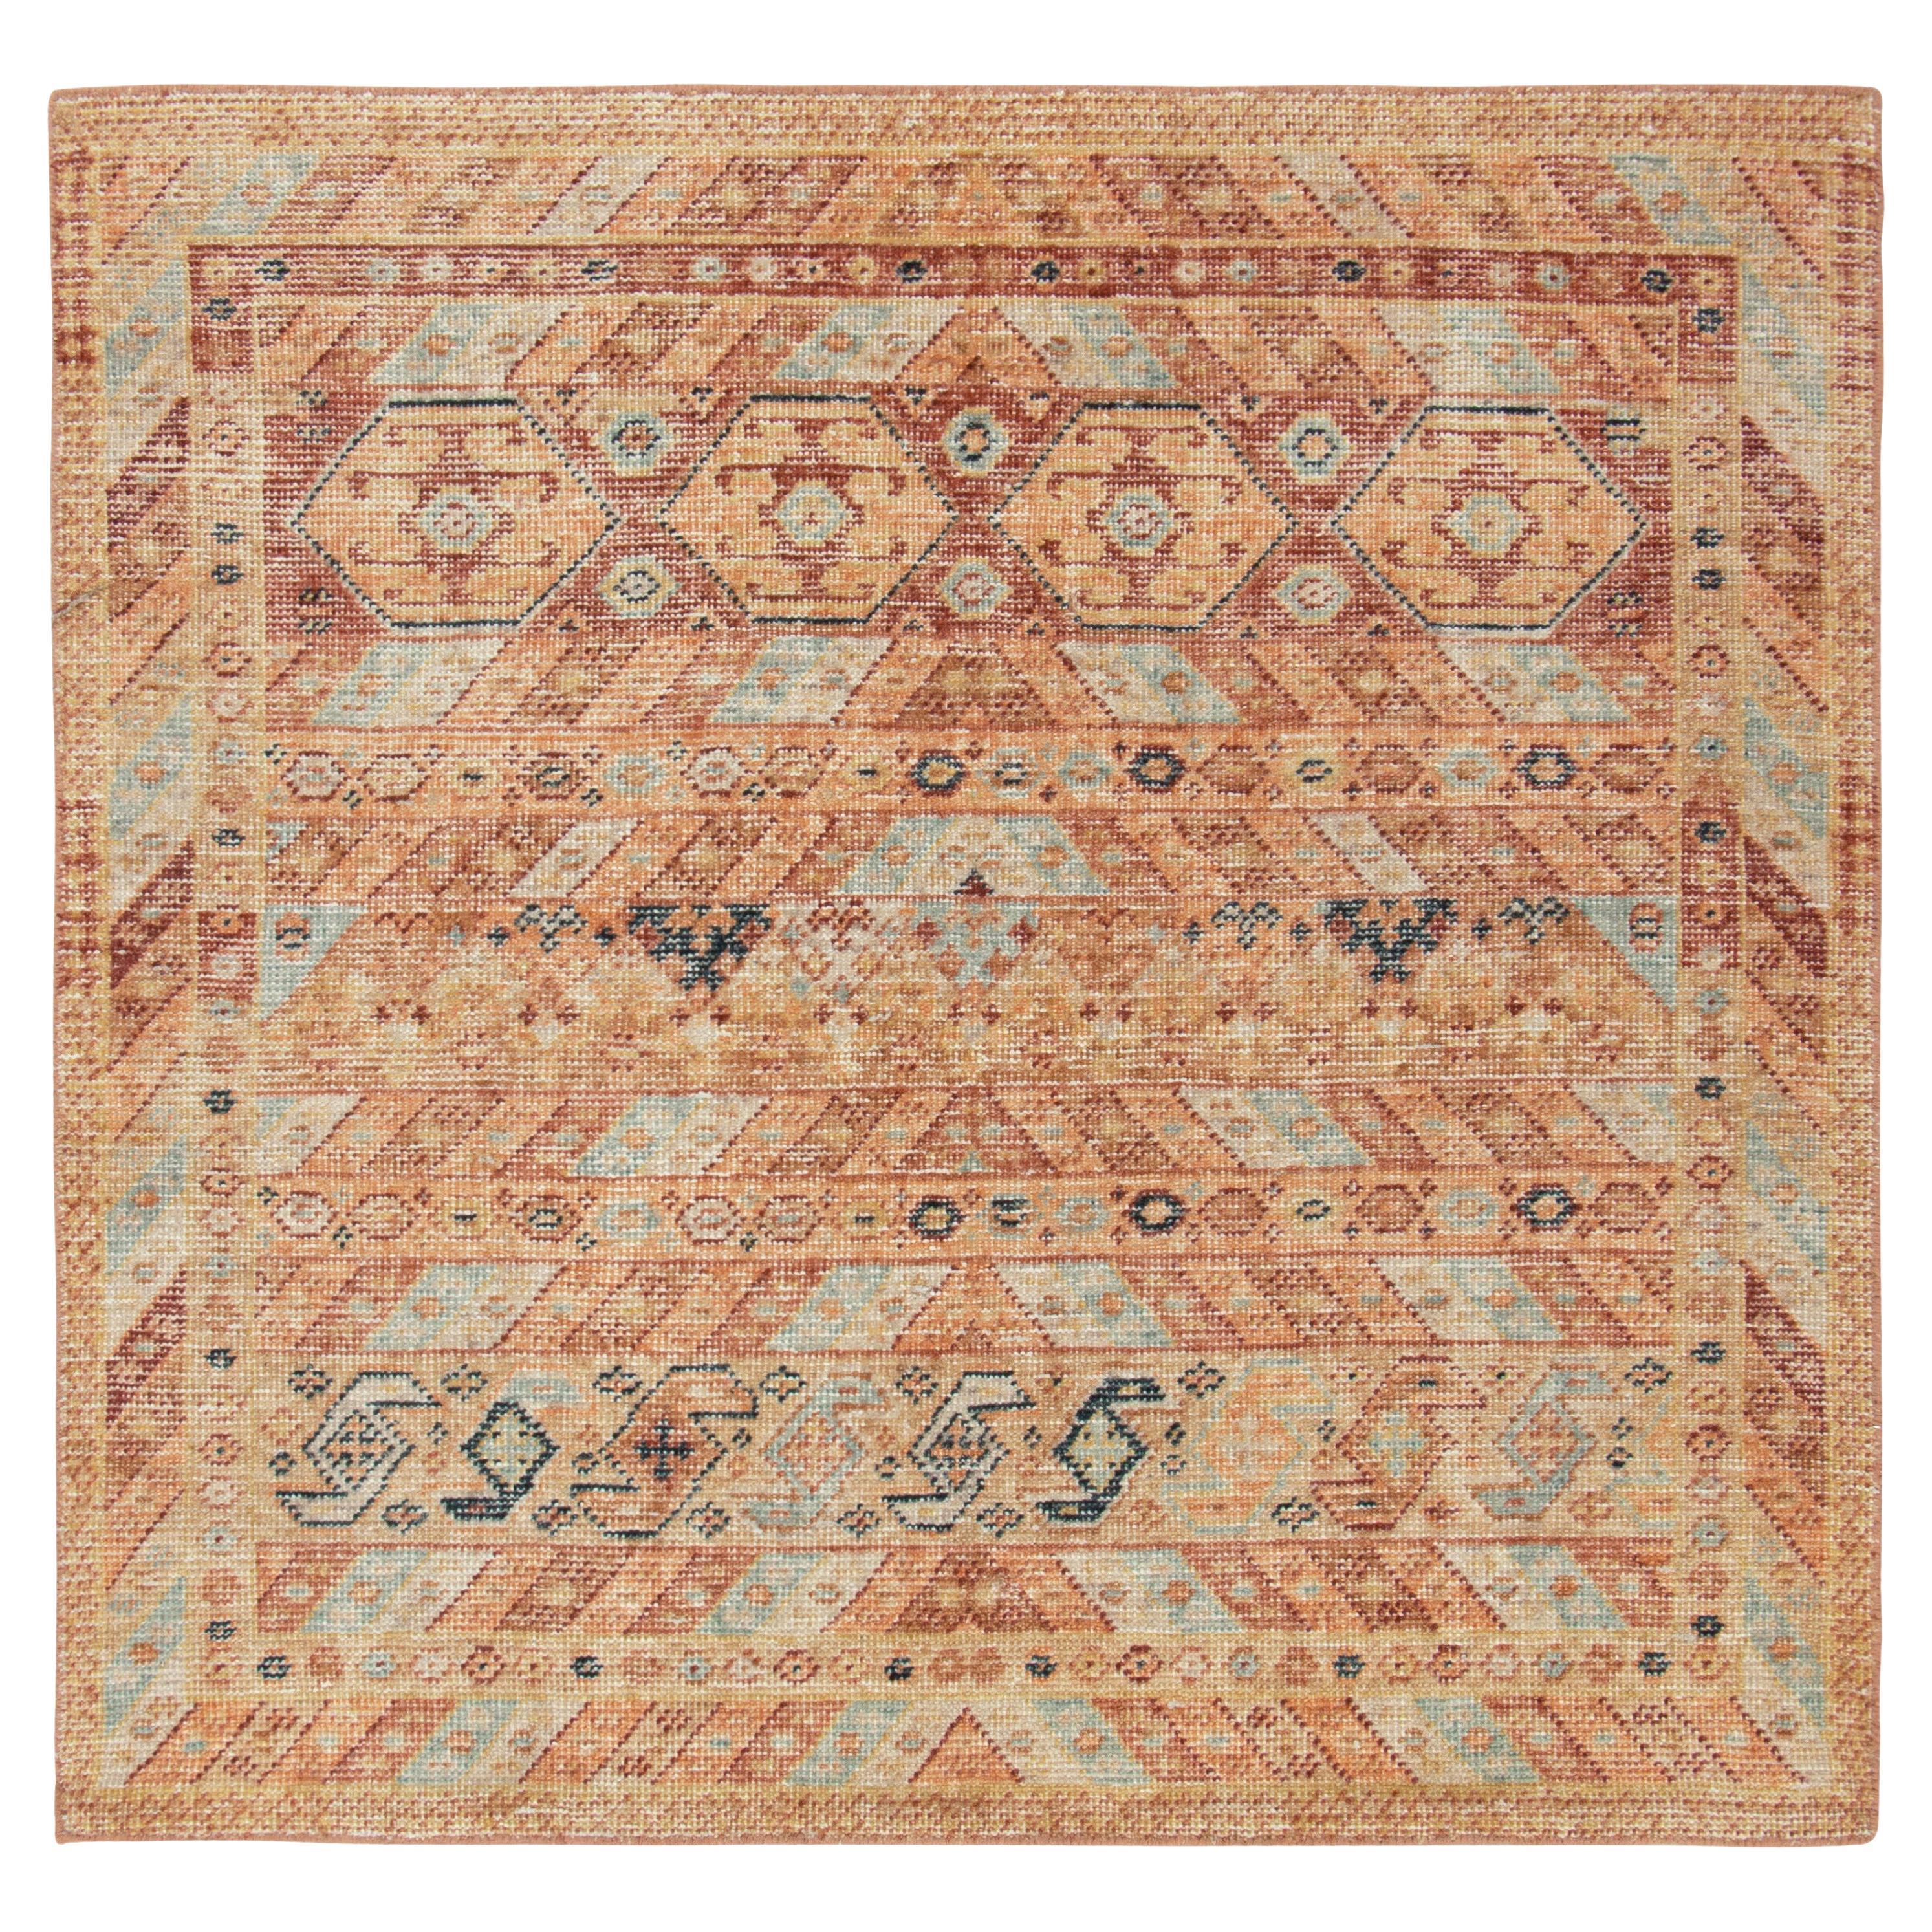 Distressed Tribal Style Square Rug in Orange, Red & Blue Pattern by Rug & Kilim